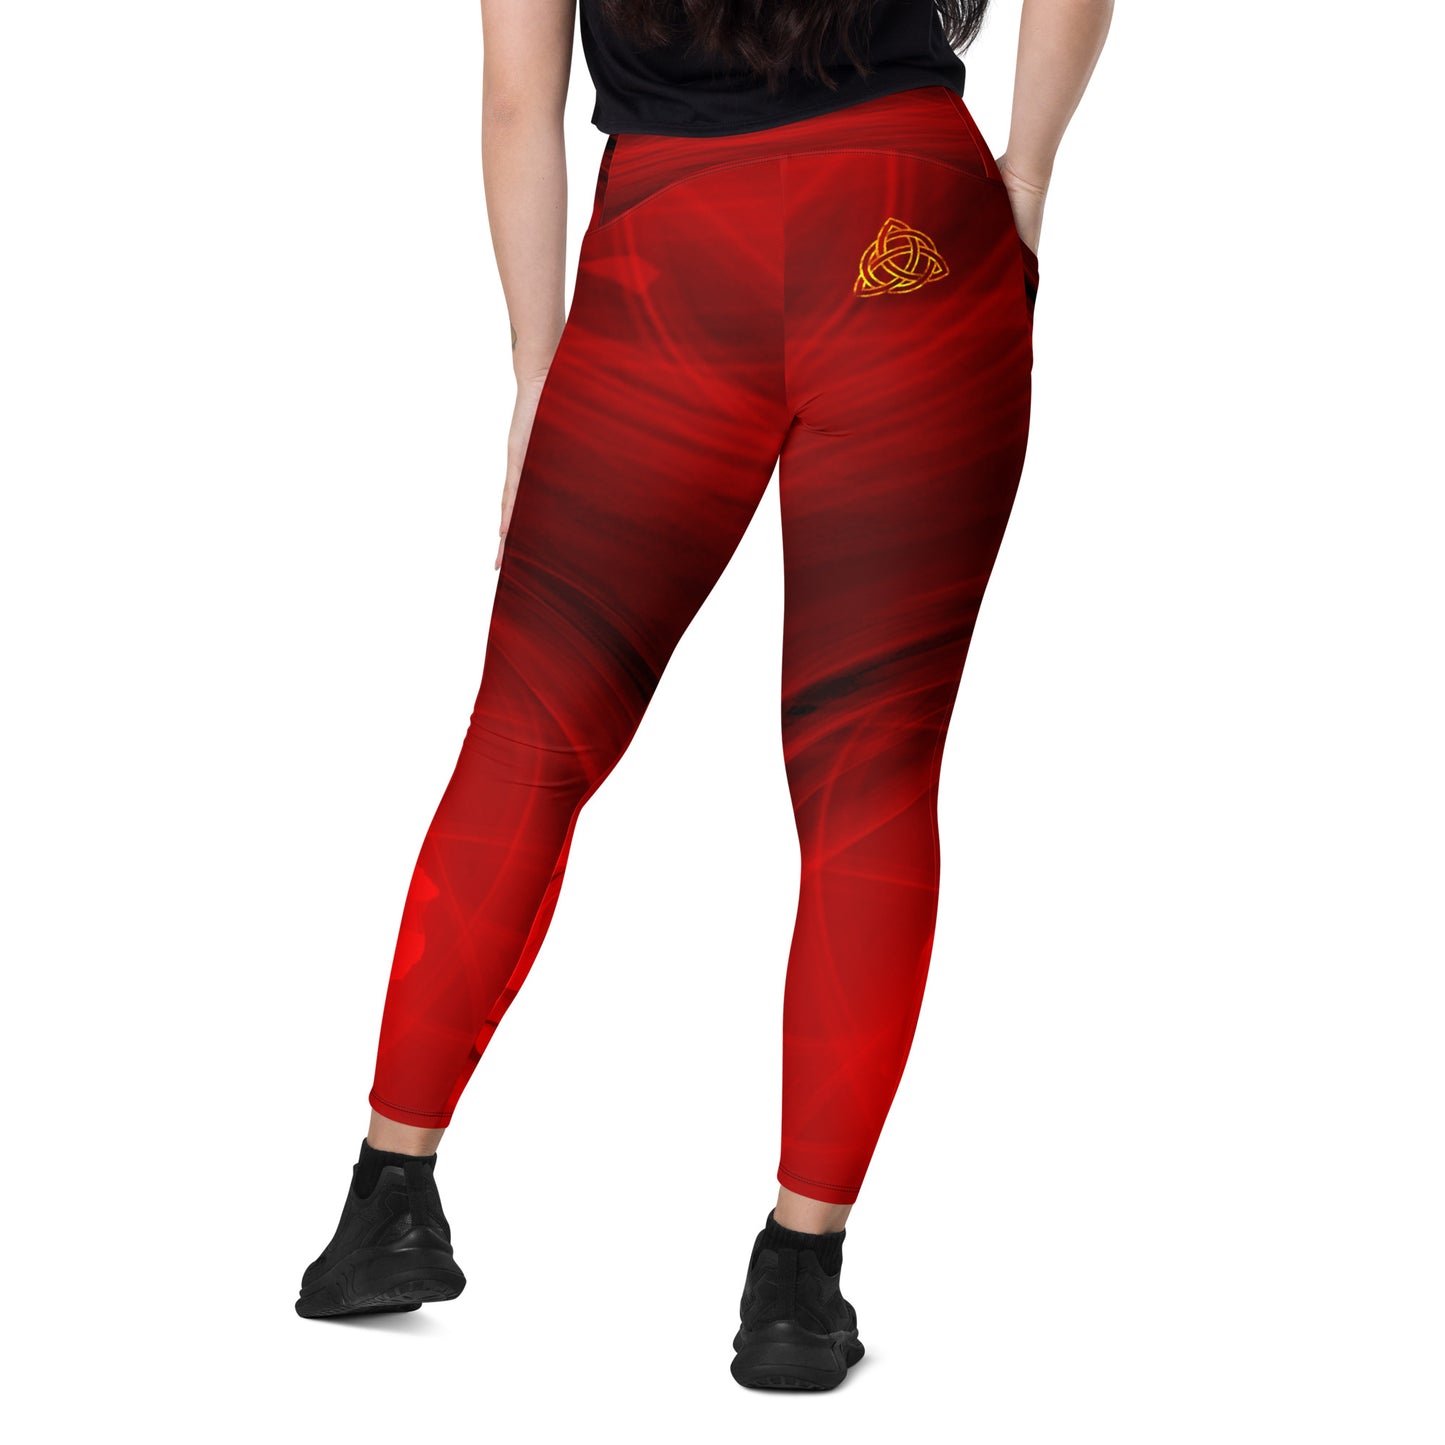 Magic Red Rose leggings with pockets